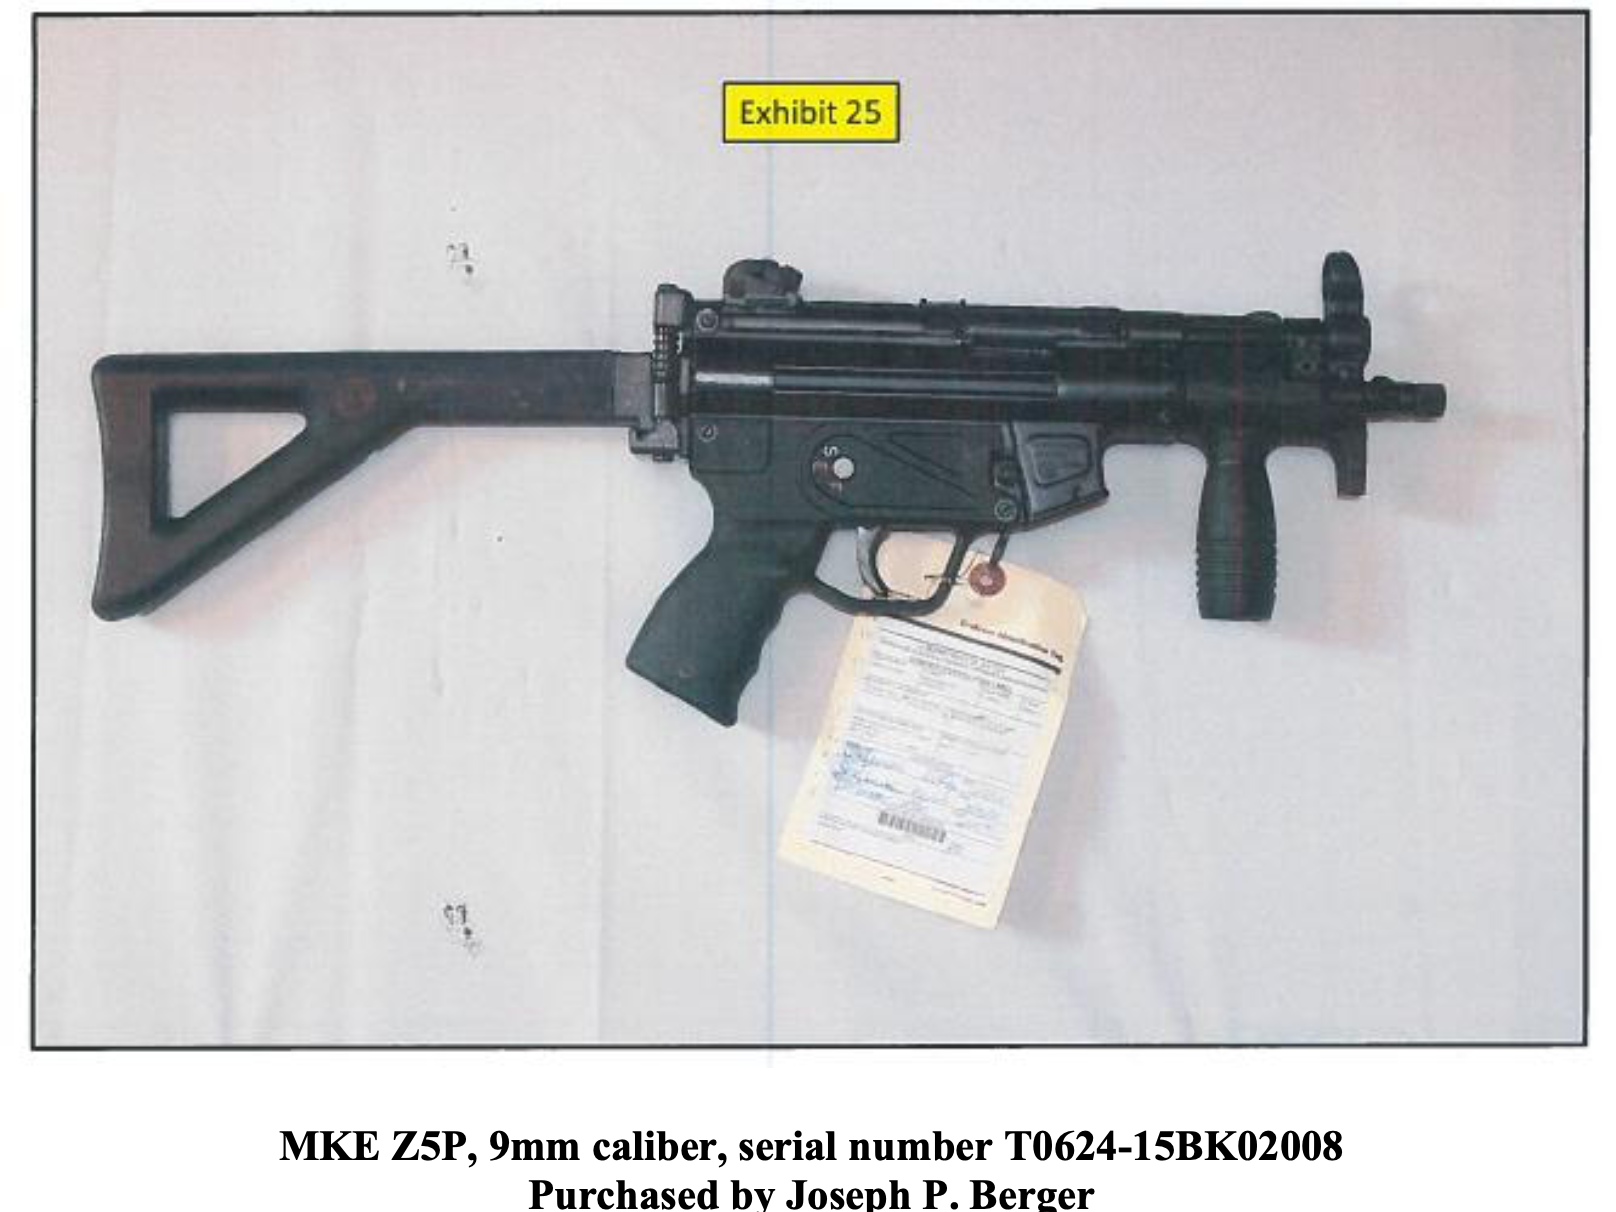 A gun pictured in court documents.